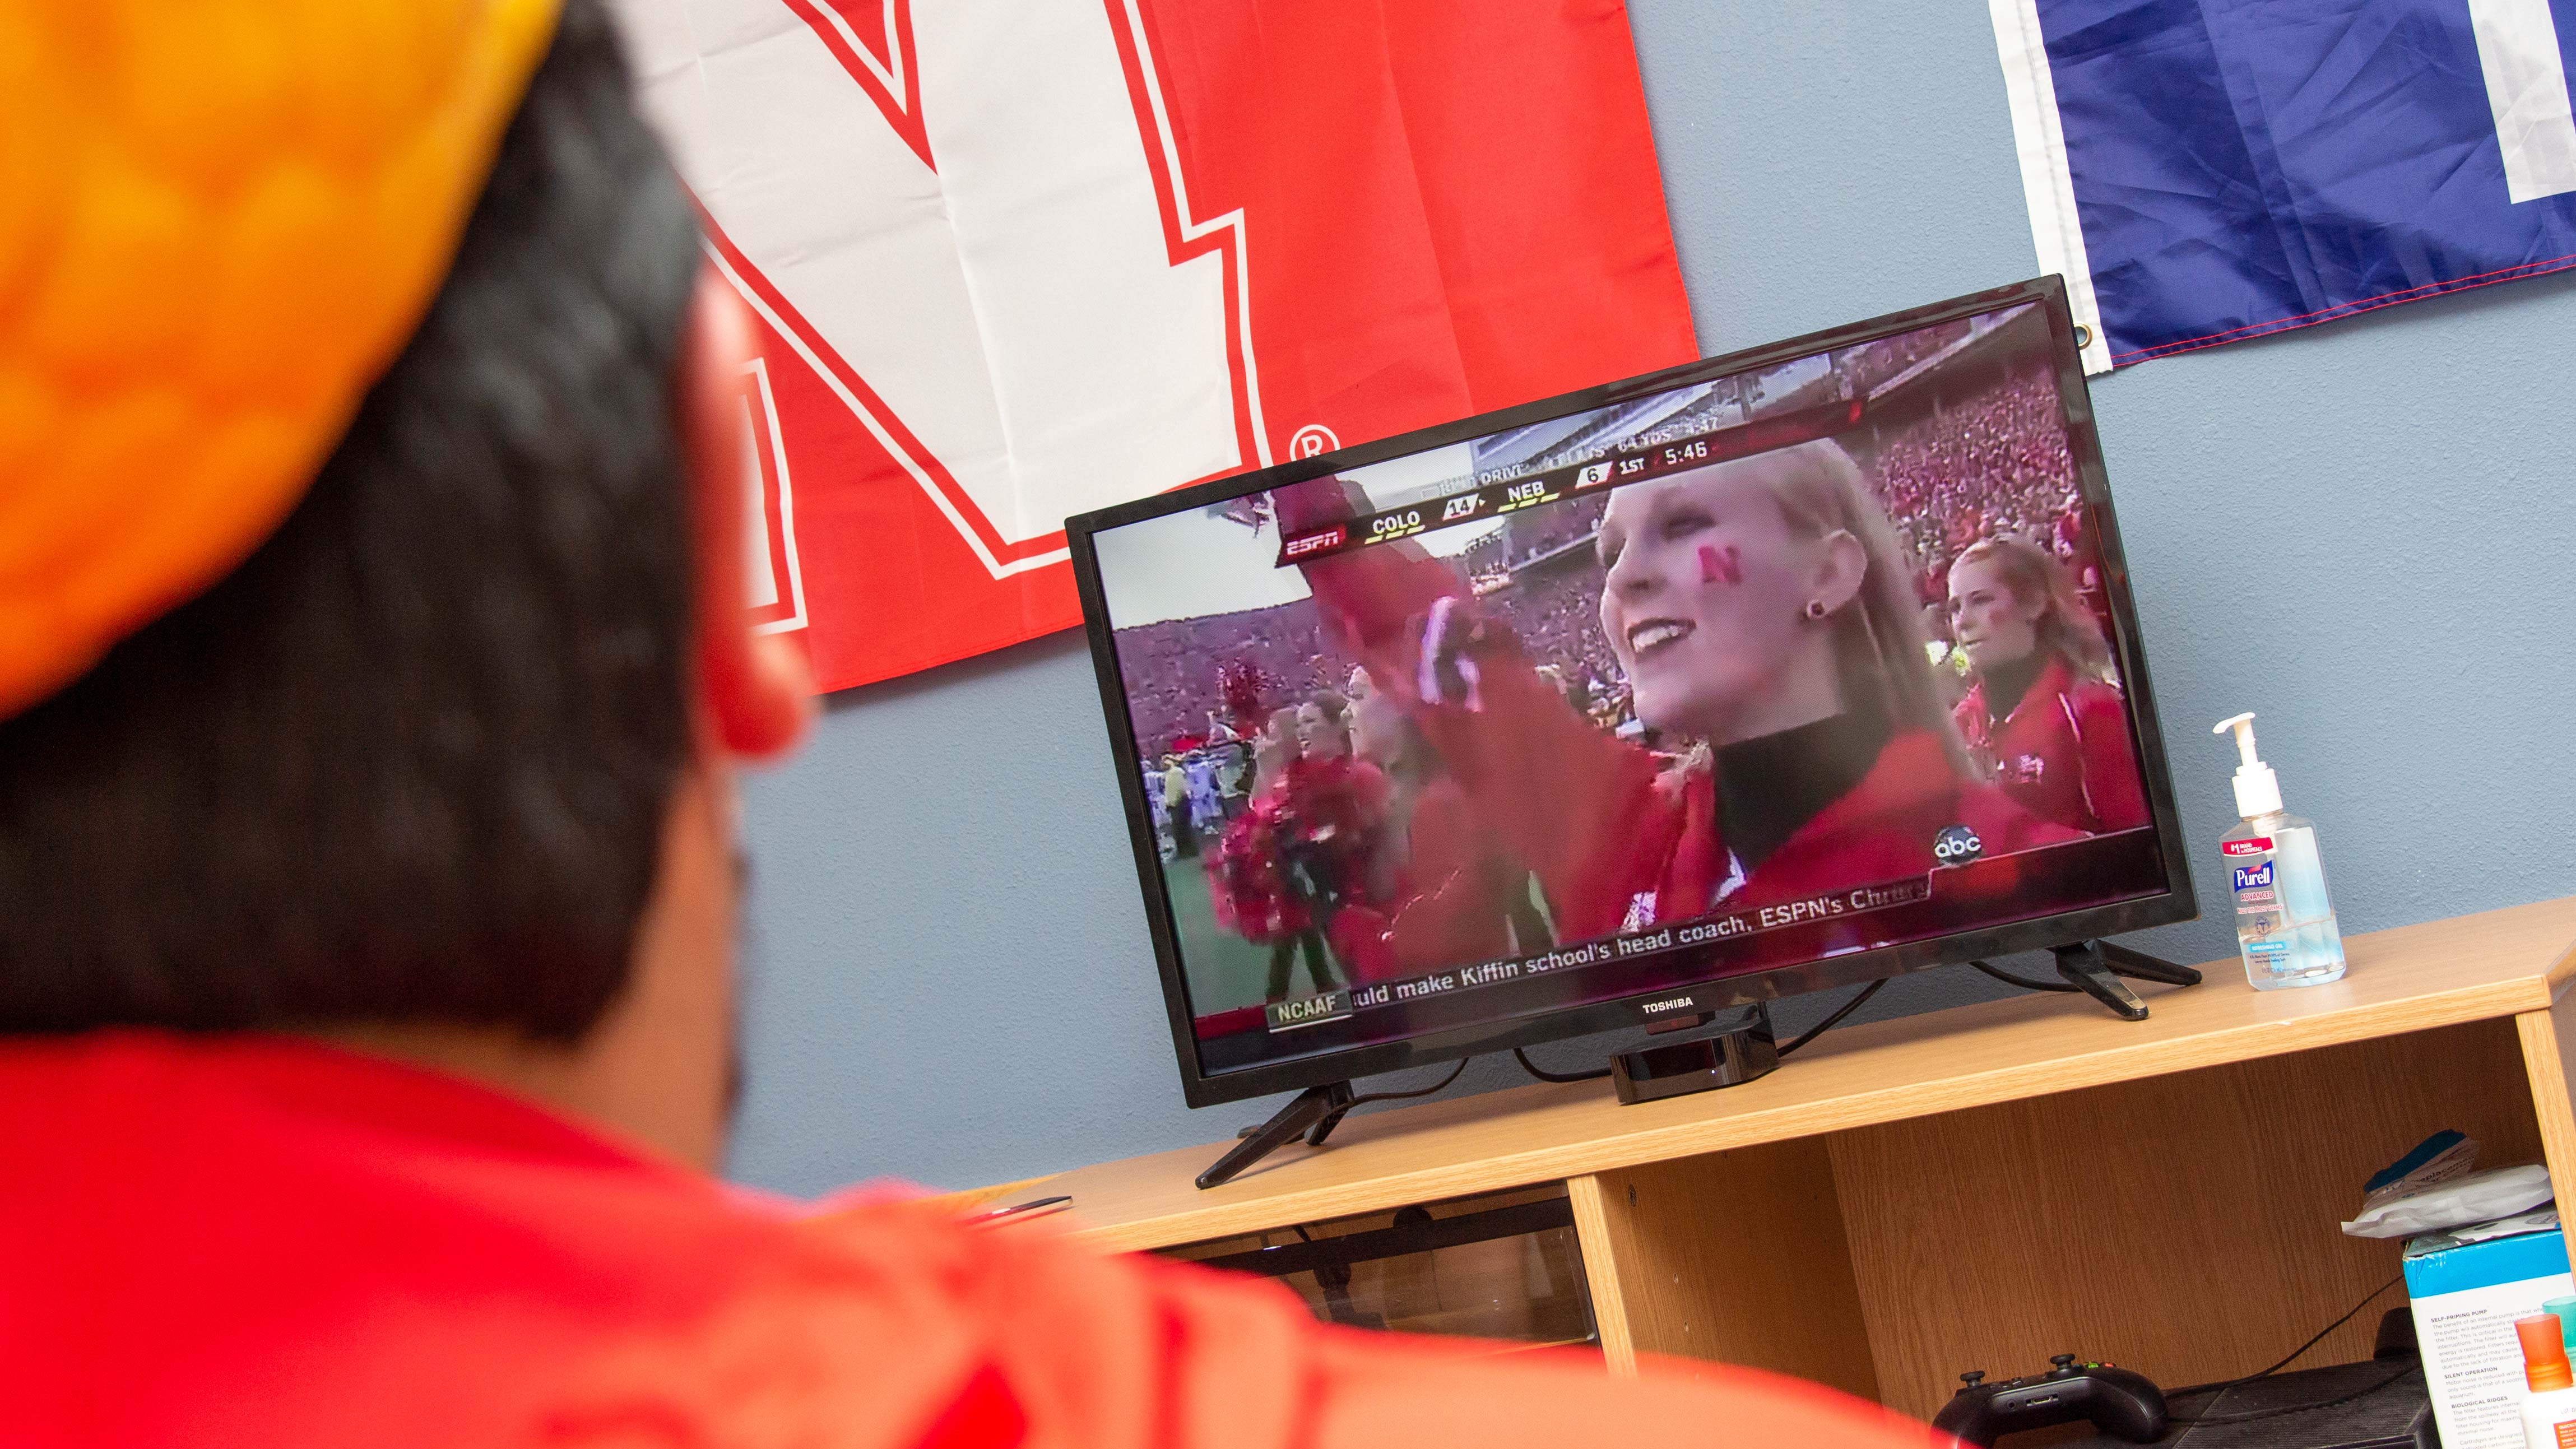 Husker football takes the field at 11 a.m., Saturday, Oct. 24 against the Ohio State Buckeyes (televised on FOX).